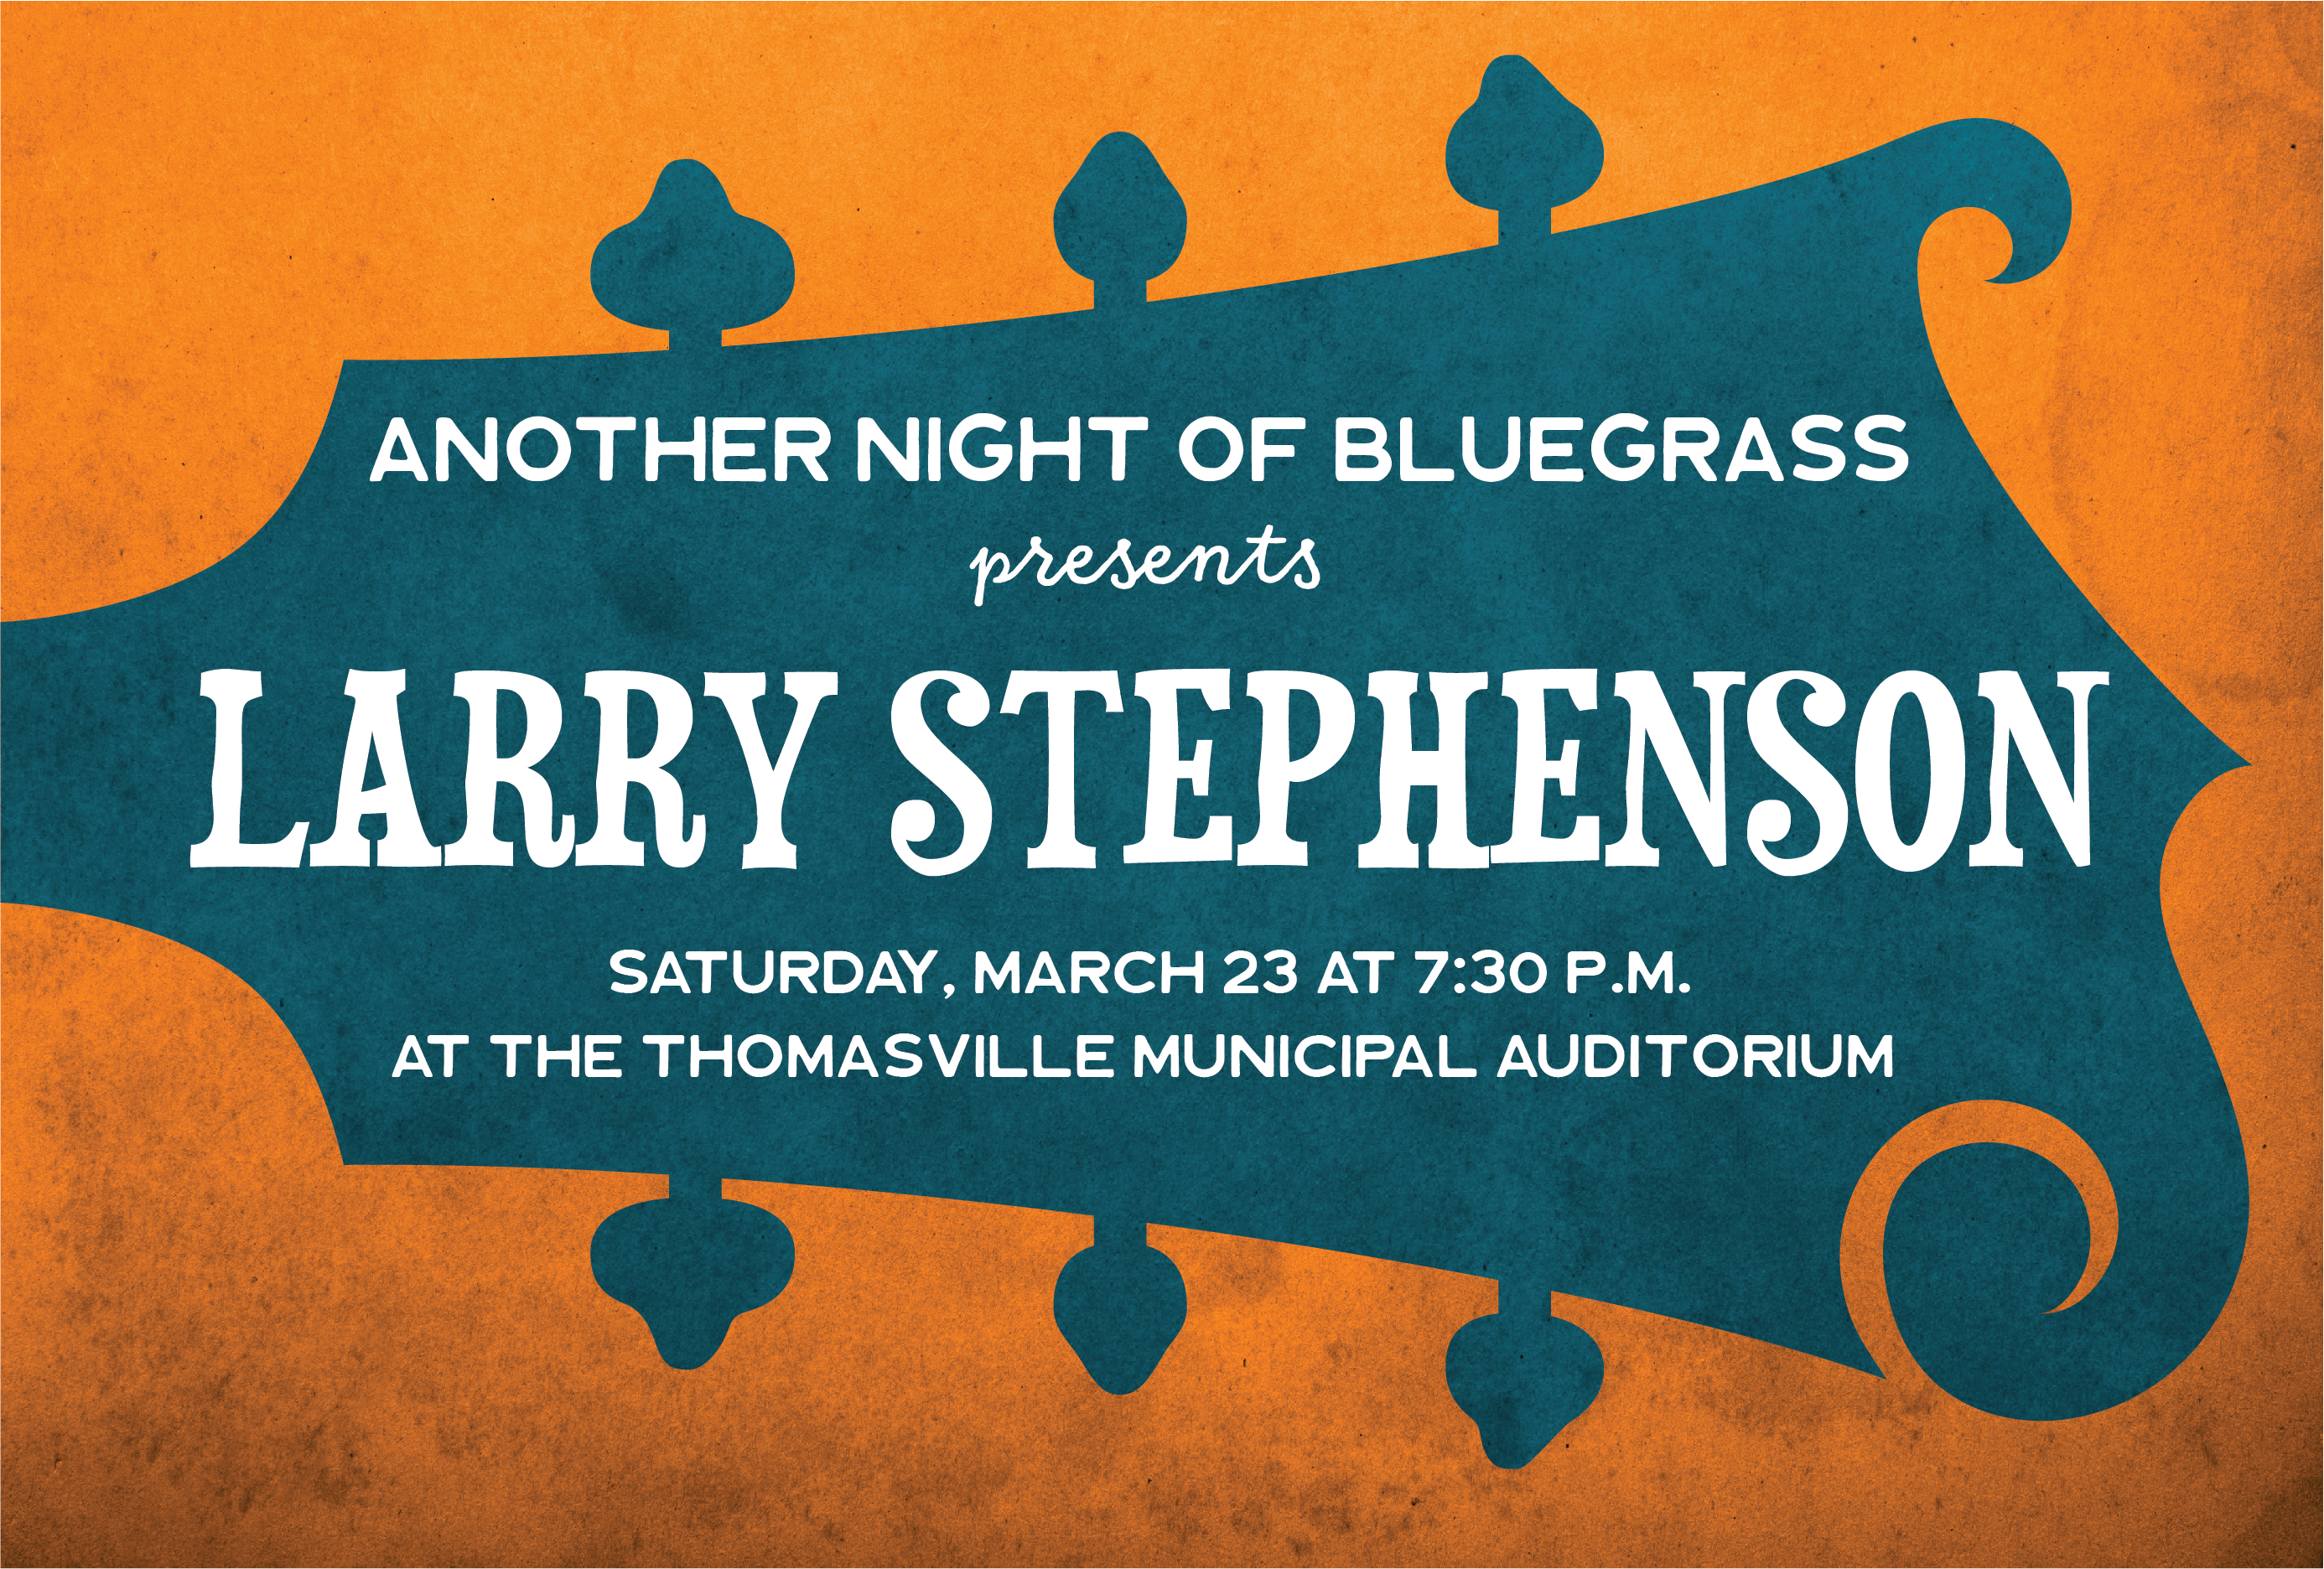 Photo for ANOTHER NIGHT OF BLUEGRASS PRESENTS LARRY STEPHENSON